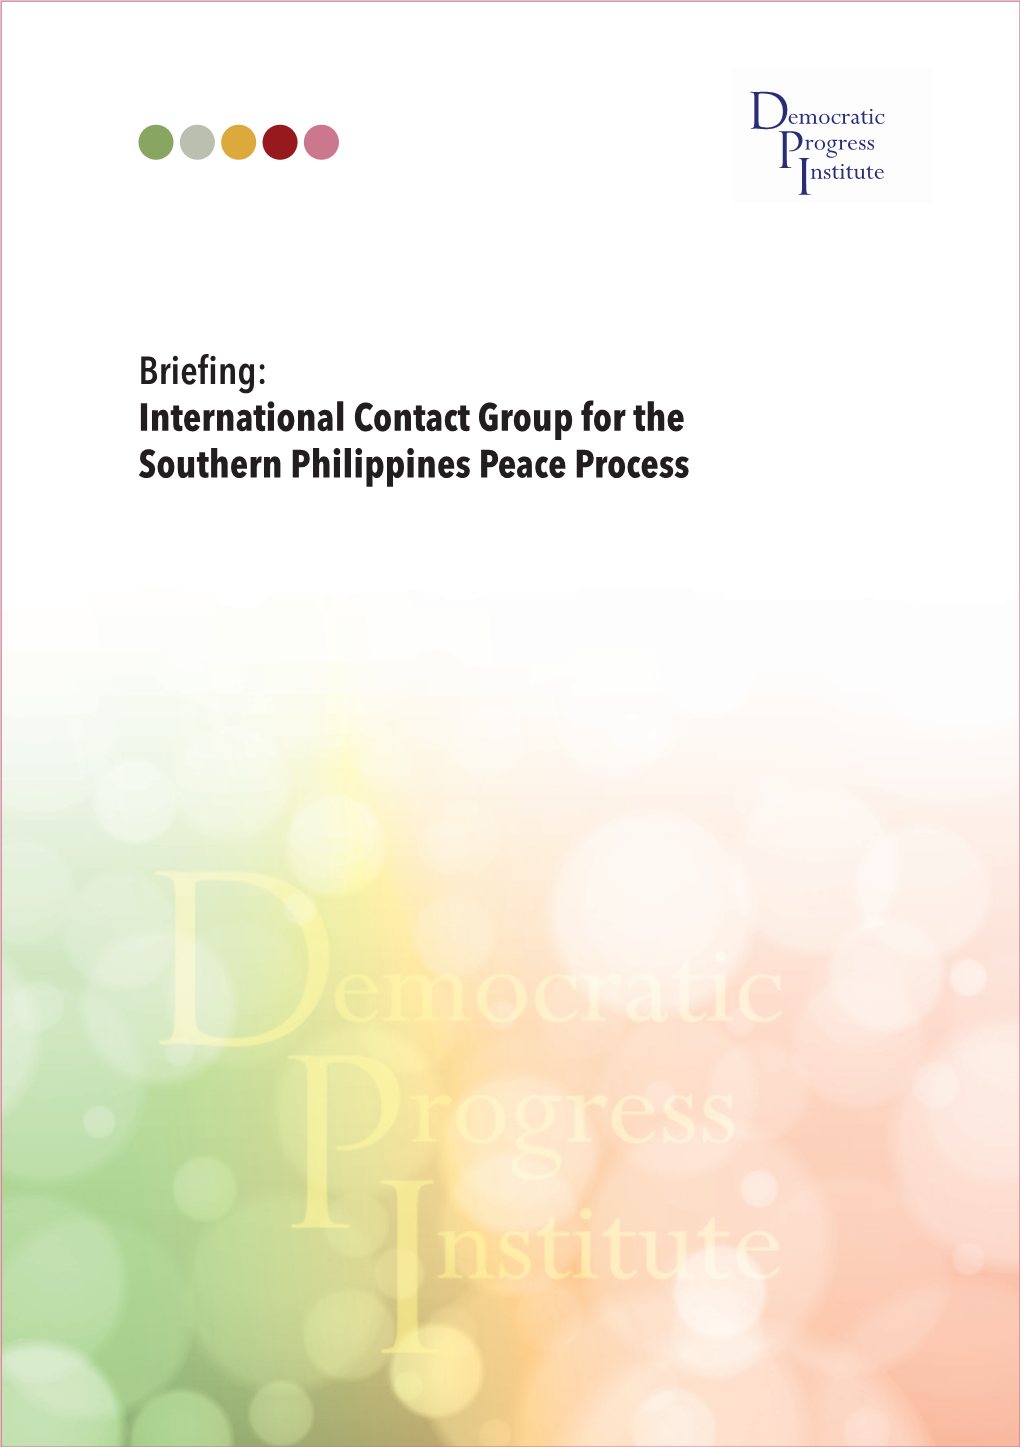 International Contact Group for the Southern Philippines Peace Process